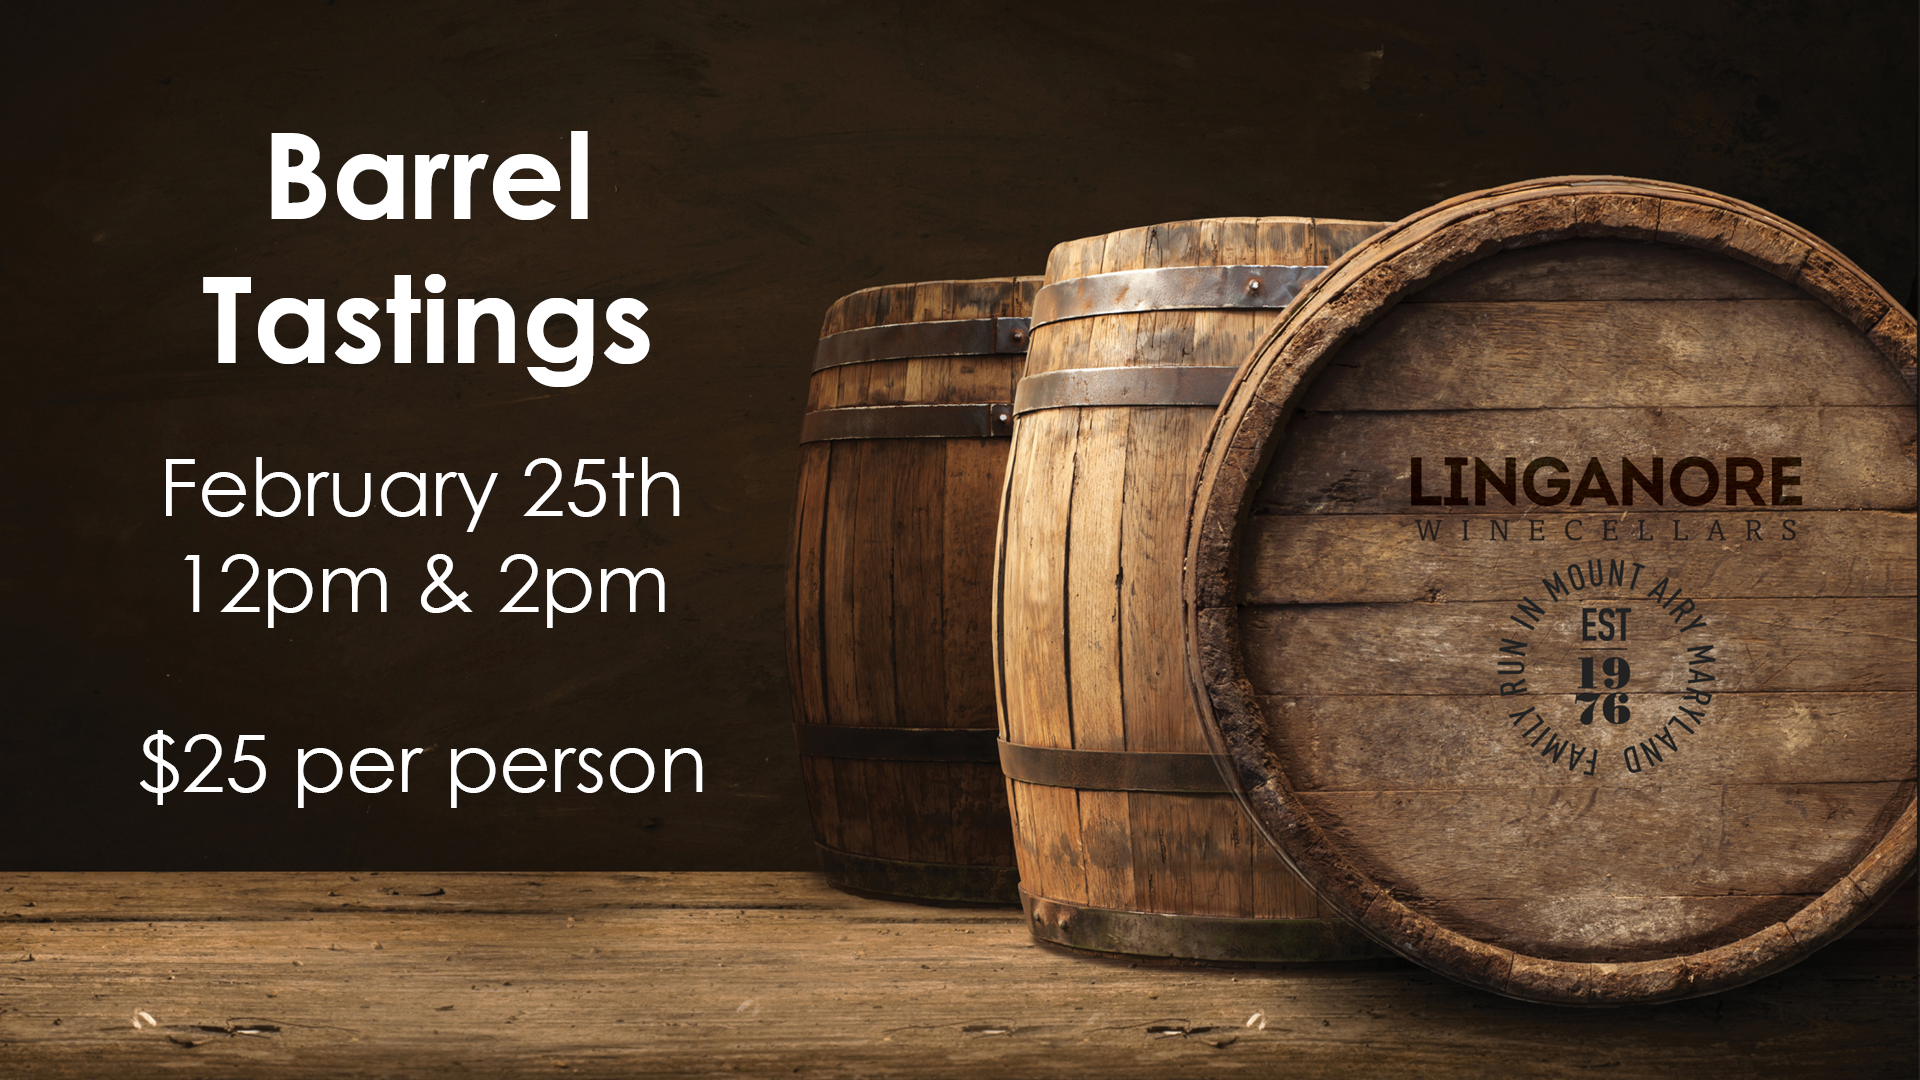 Barrel Tastings- Things to Do Frederick MD